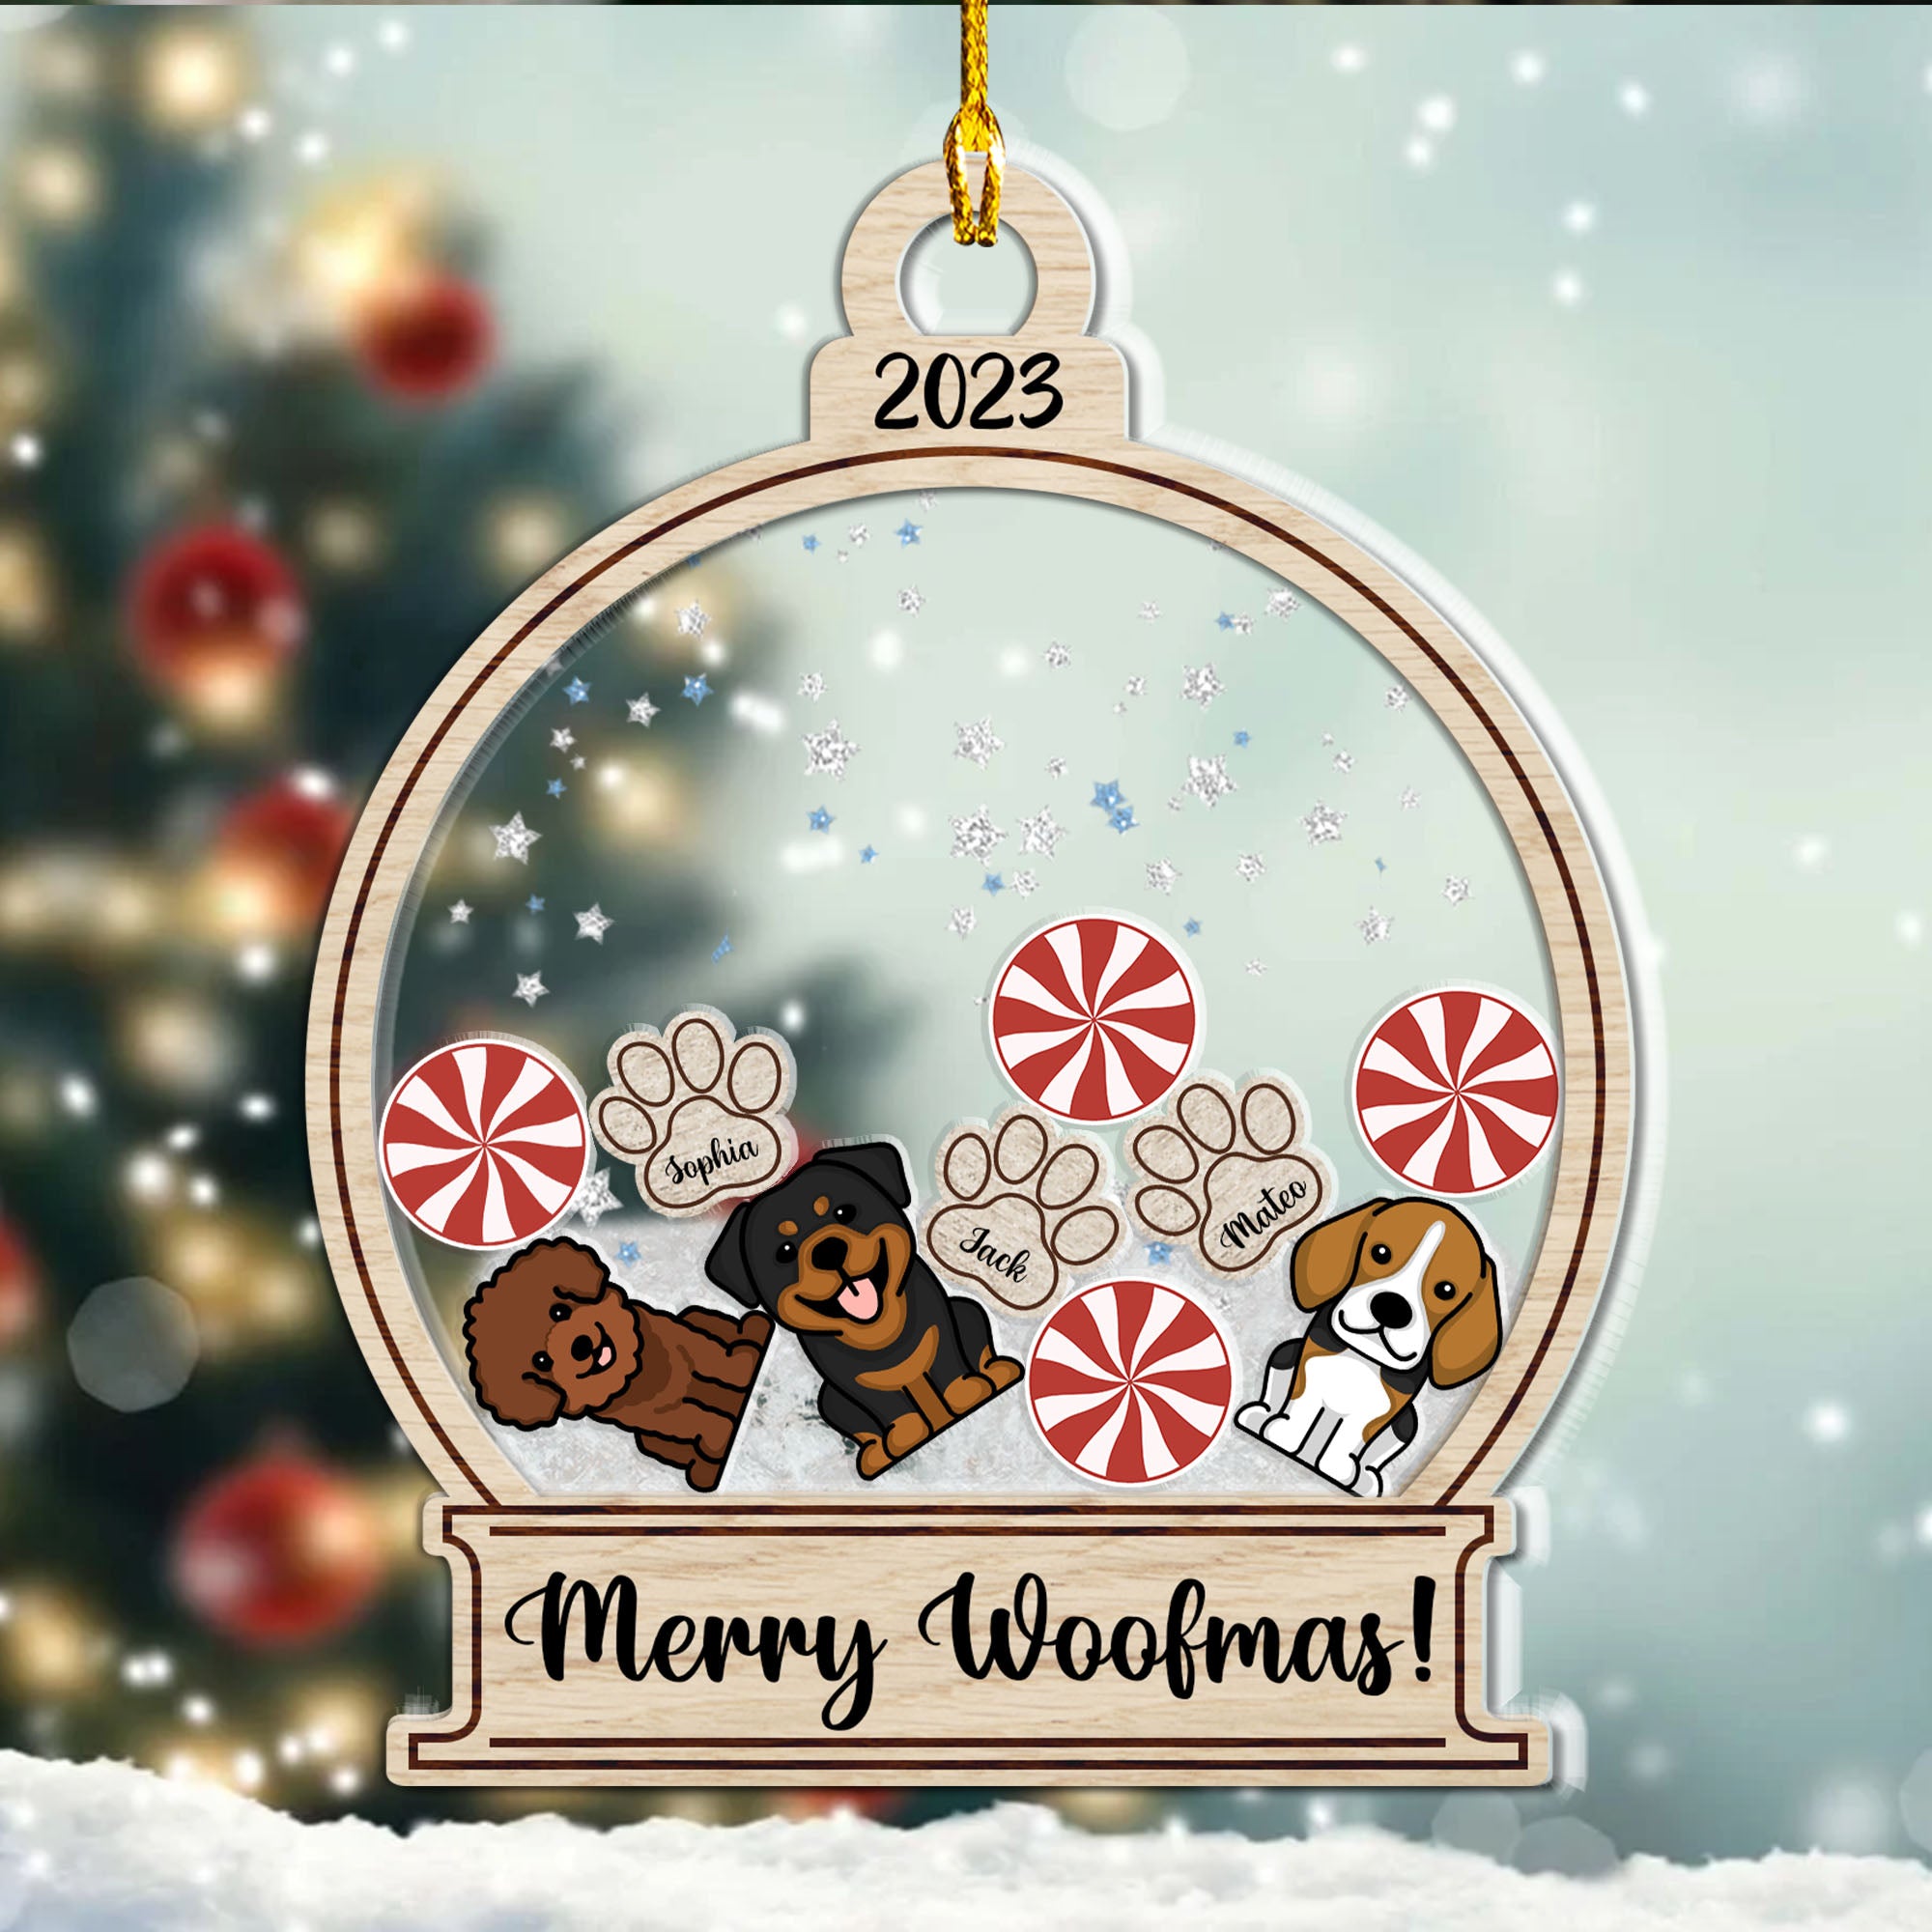 Merry Woofmas Candy Personlized Family Gift - Personalized Custom Shaker Ornament